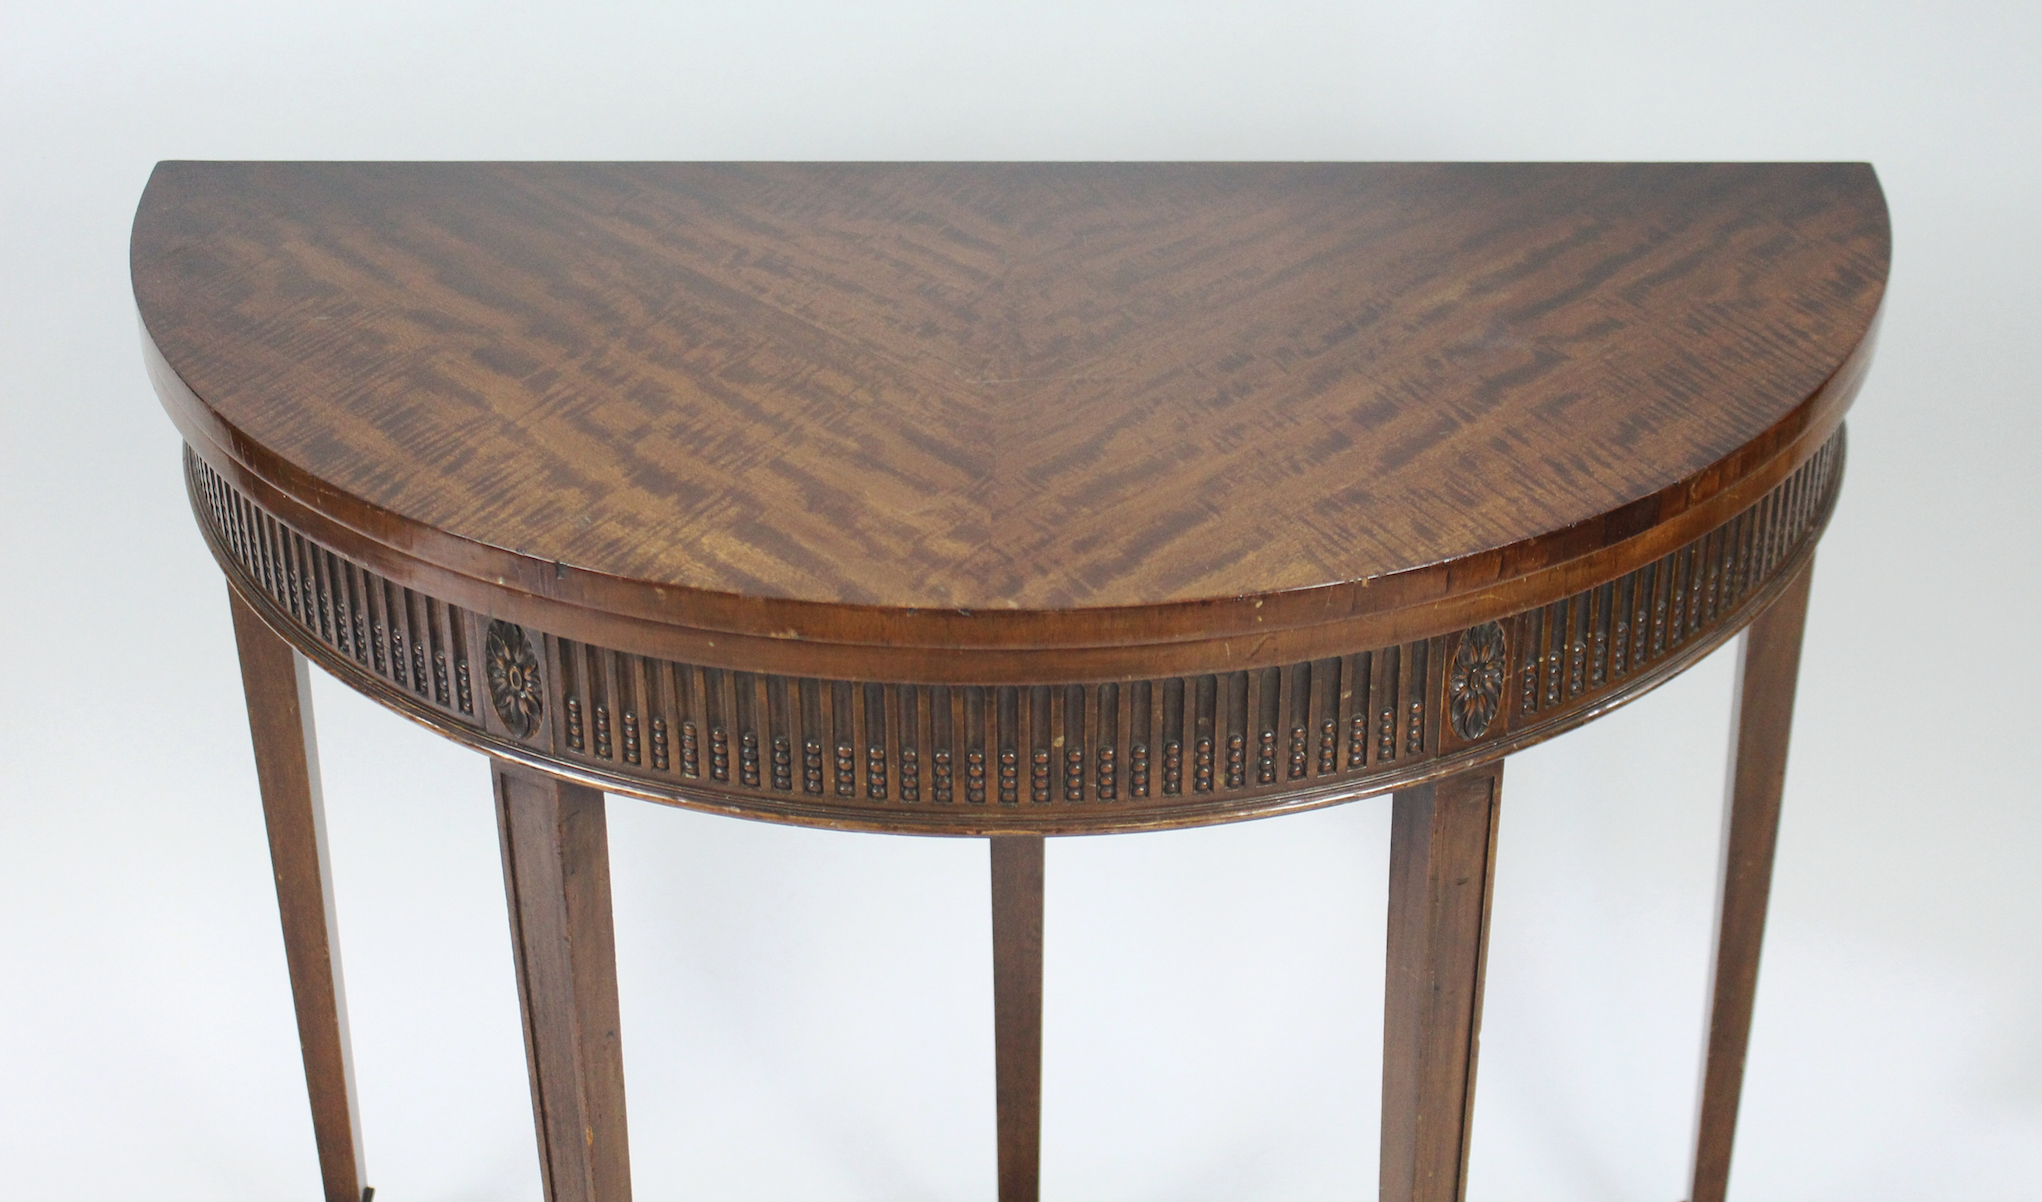 Georgian Style Solid Mahogany Demilune Side Table - Image 6 of 7